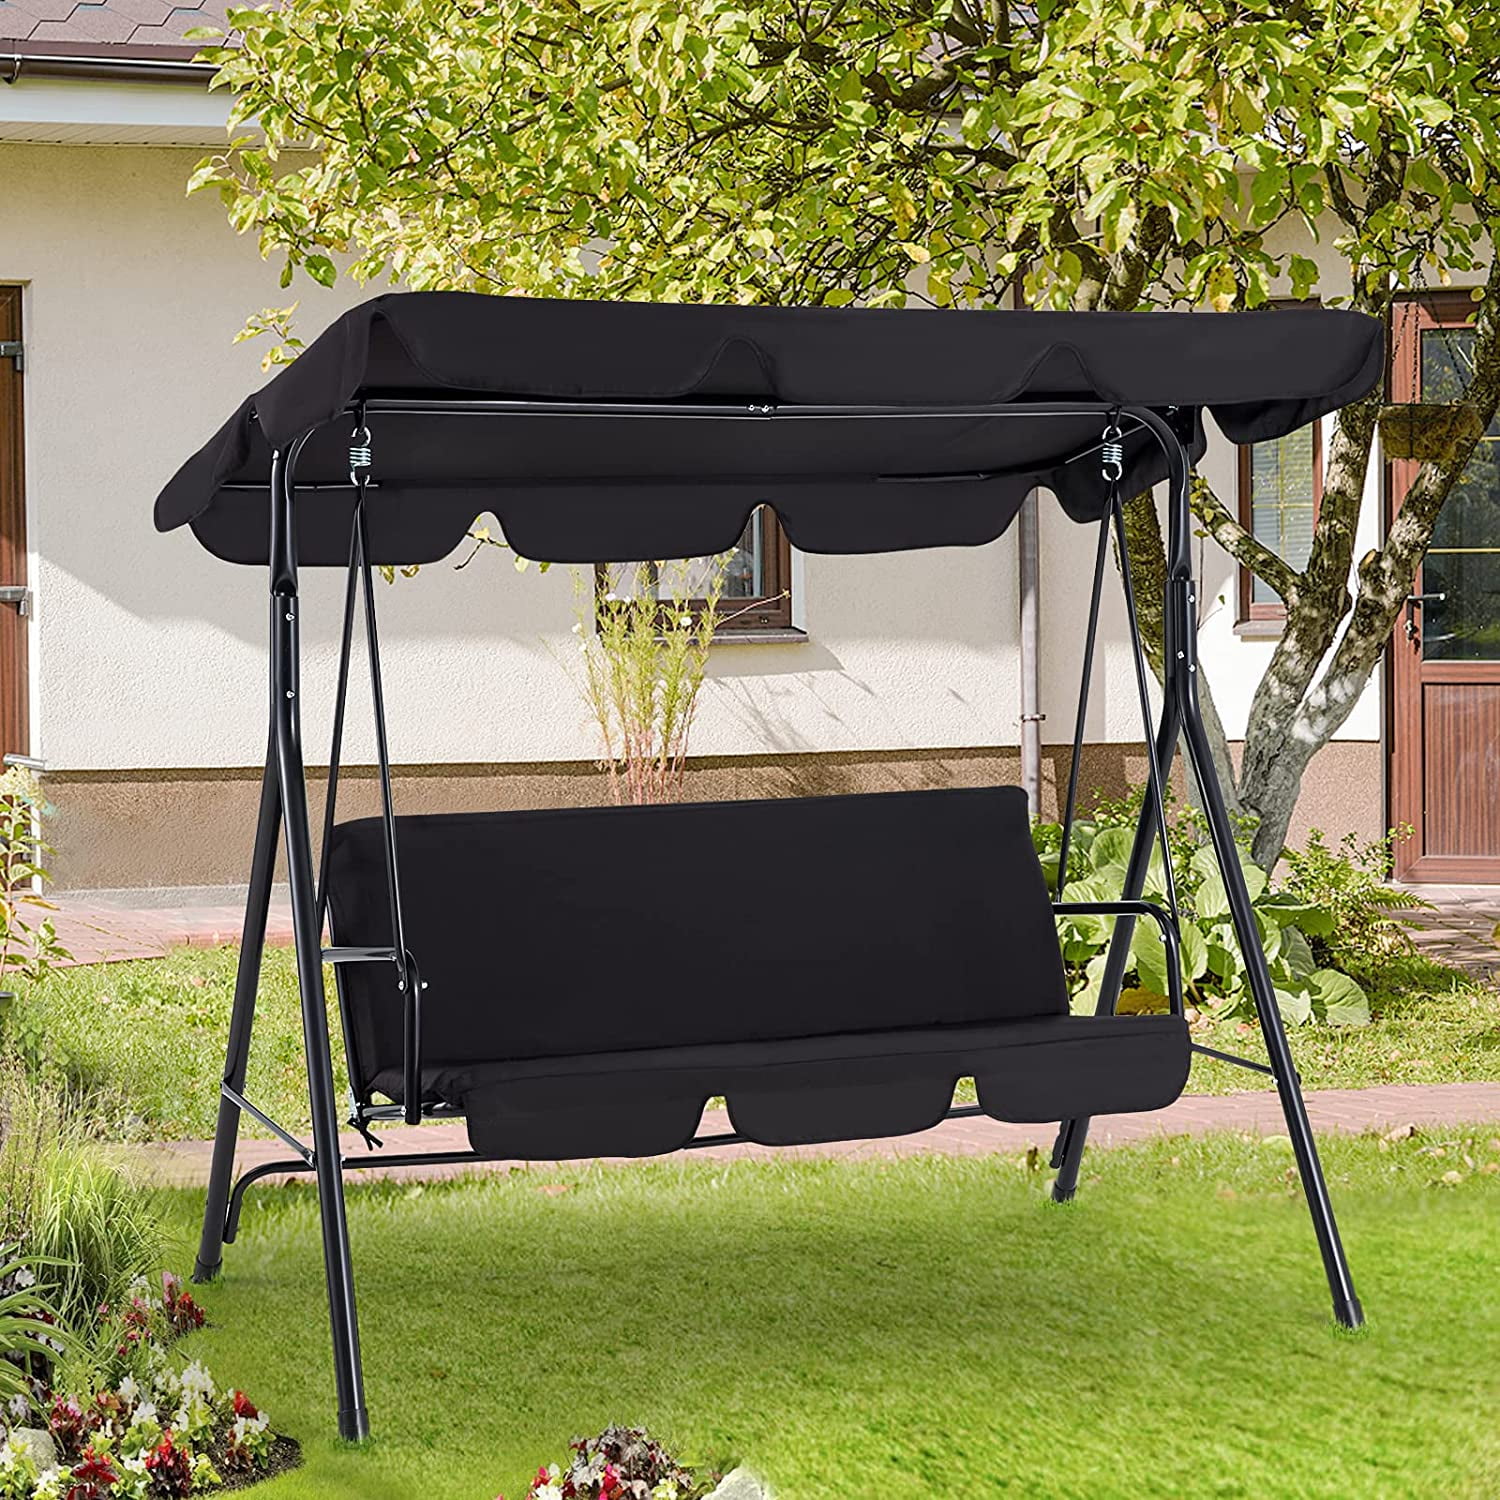 Details about   Swing Top Canopy Cover Waterproof 2 3 Seater Garden Yard Seat Replacement Roof 